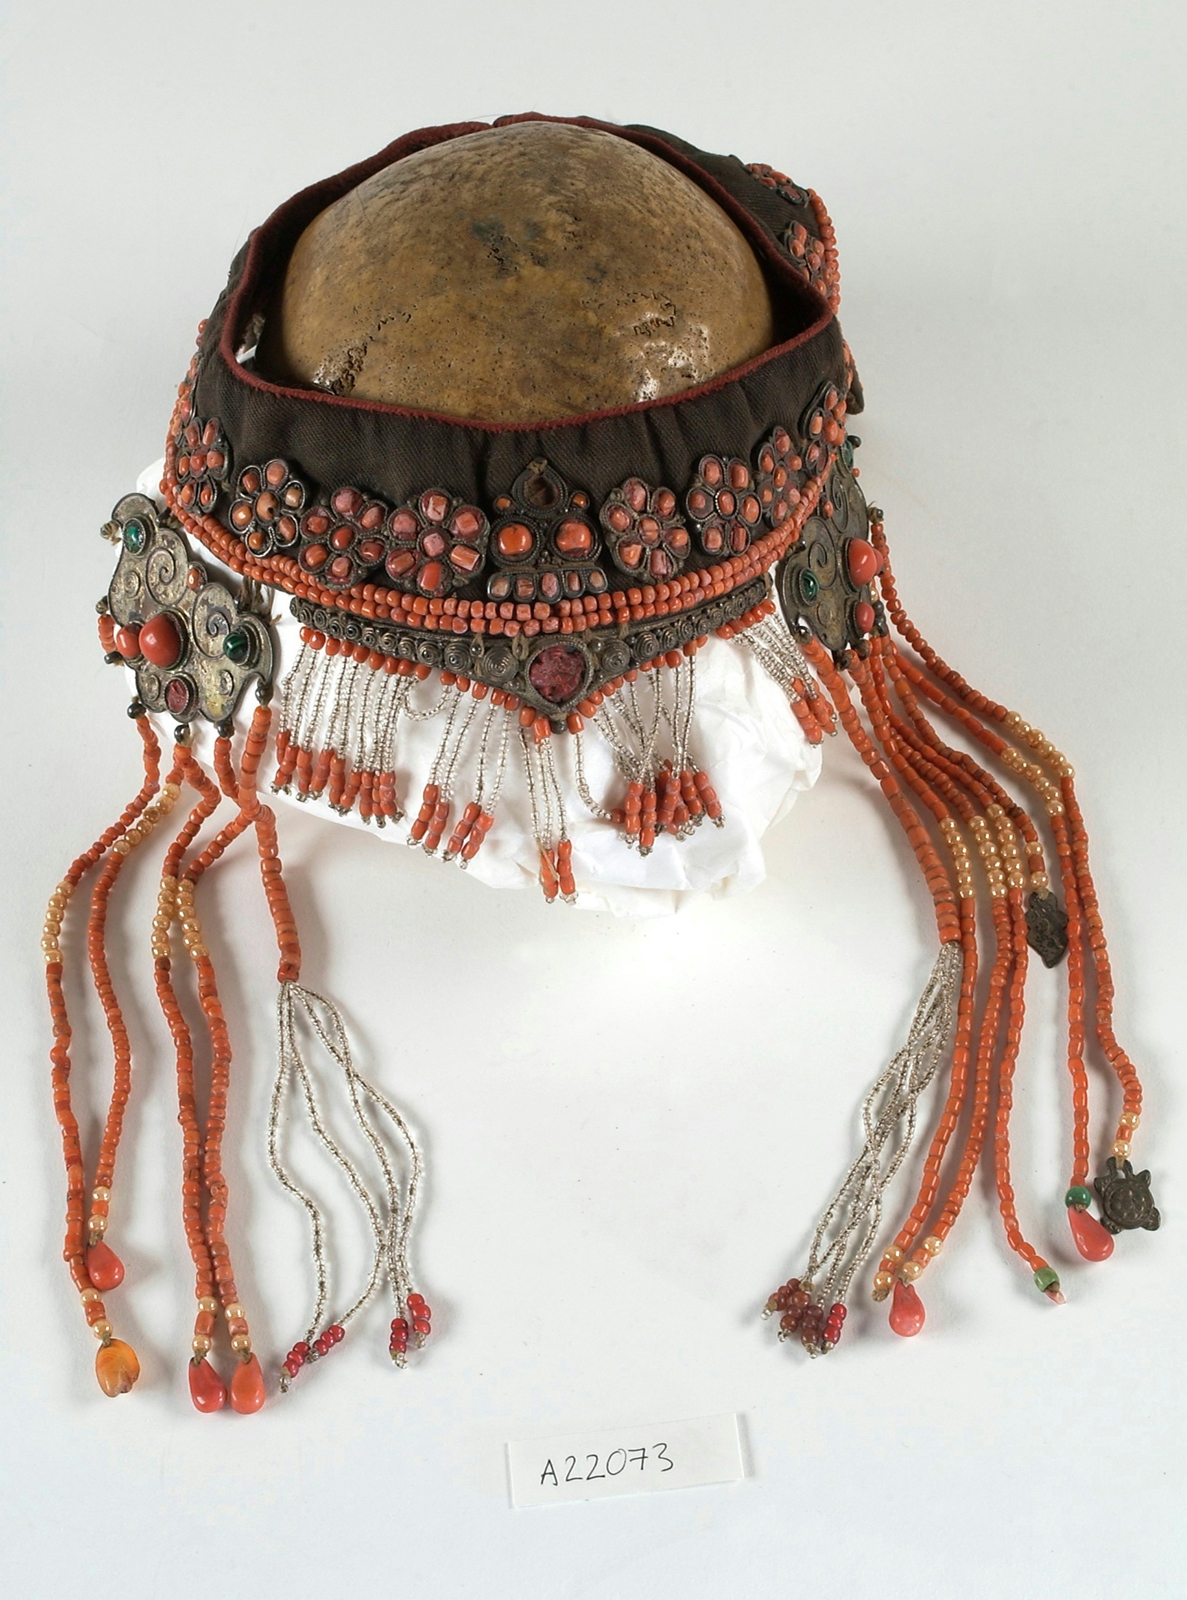 A photograph of a headdress made from brown material, decorated with clear, pink-red and green beads, and decorative metalwork. 